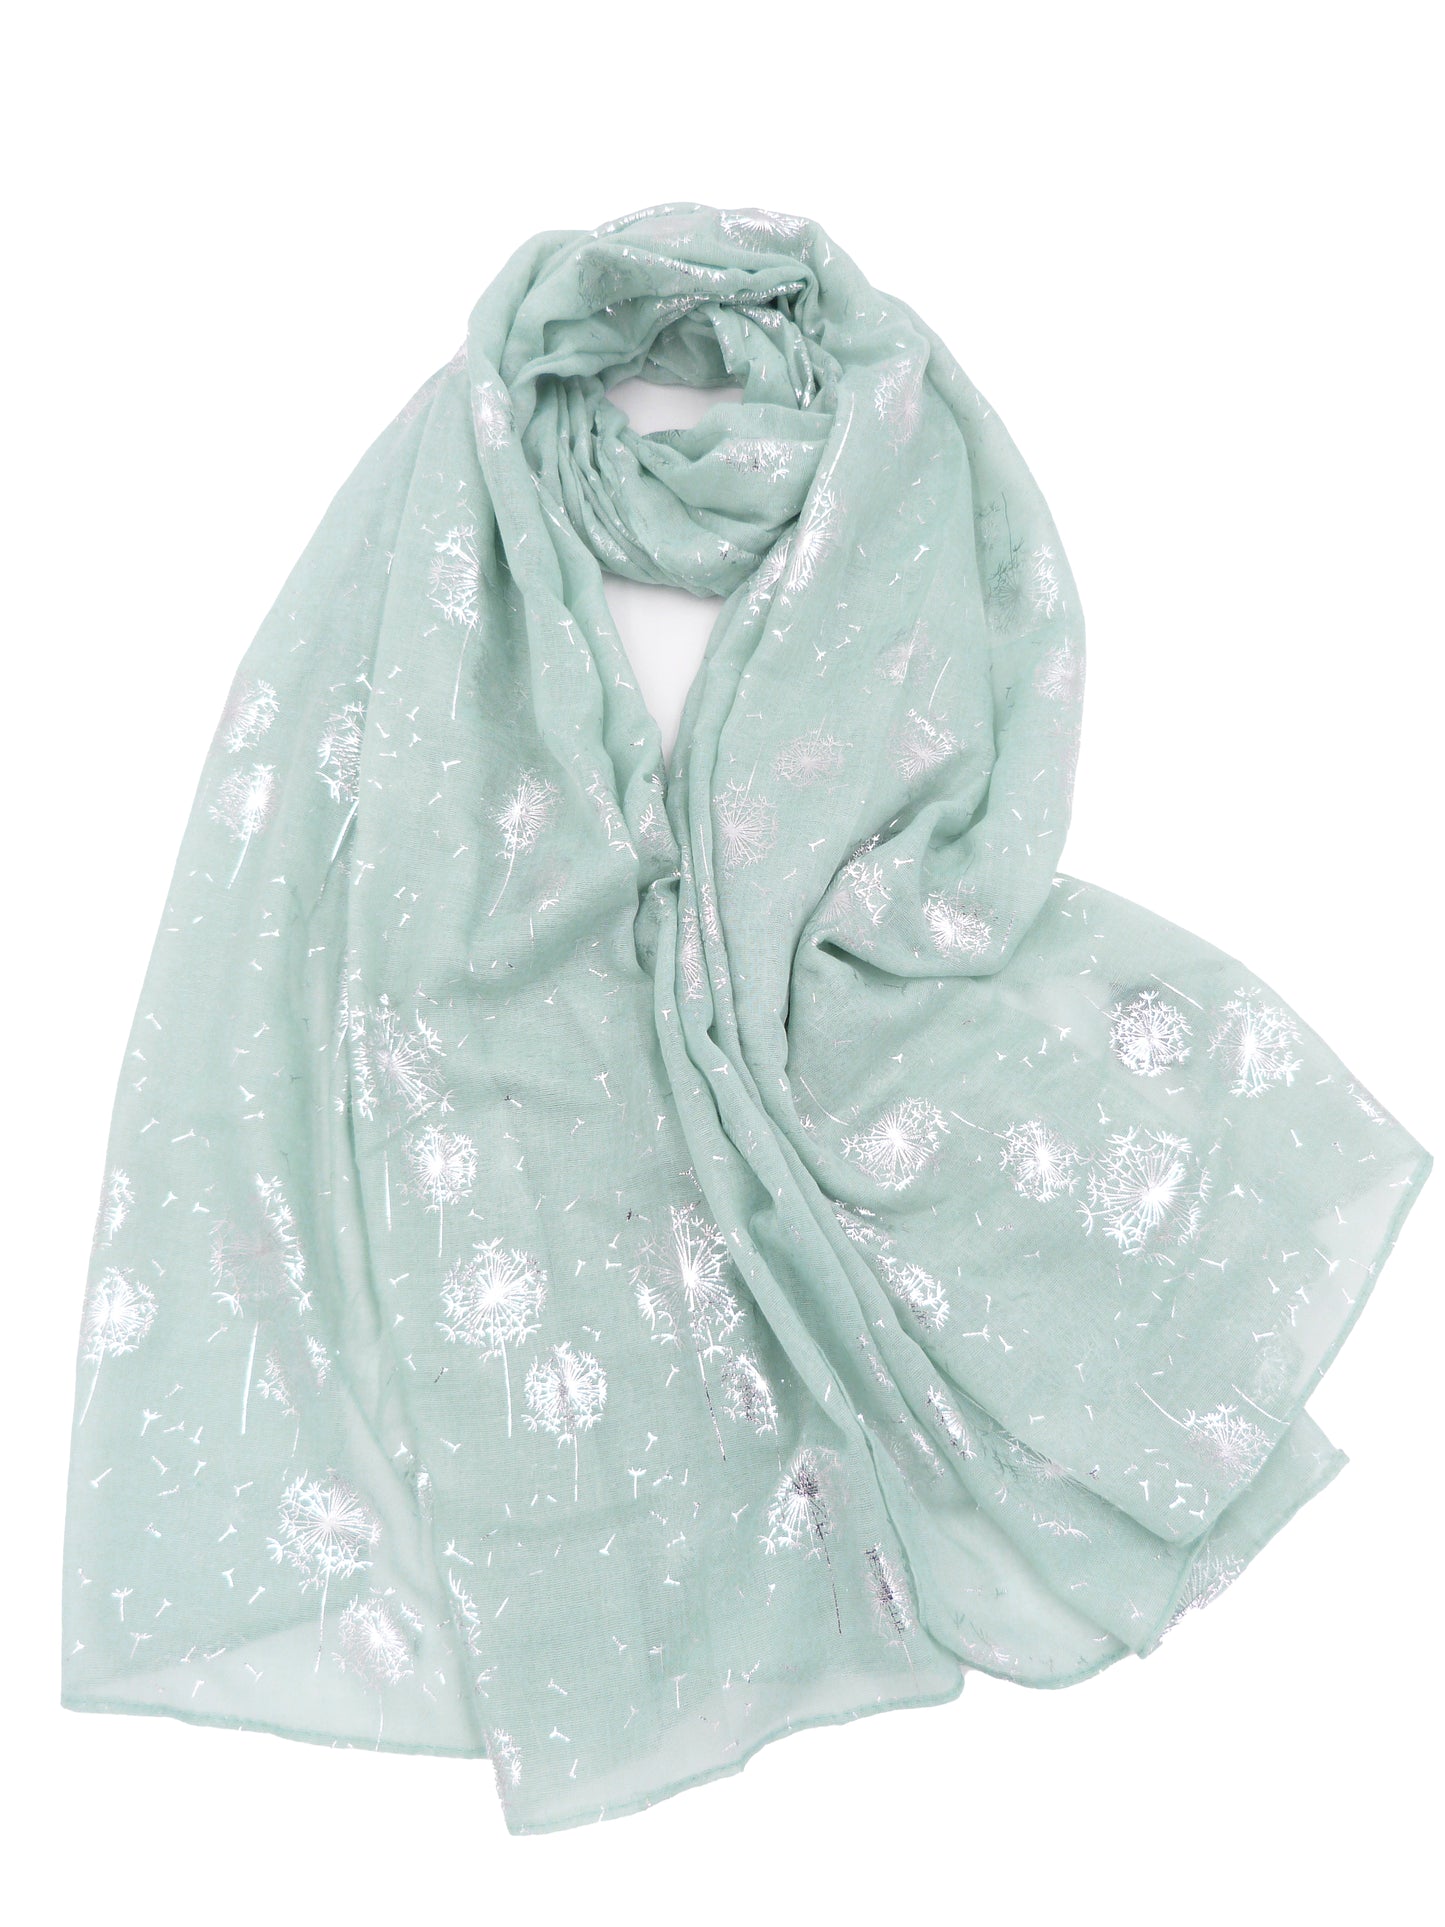 New Glitter Dandelion Print Scarf Come with Gift box